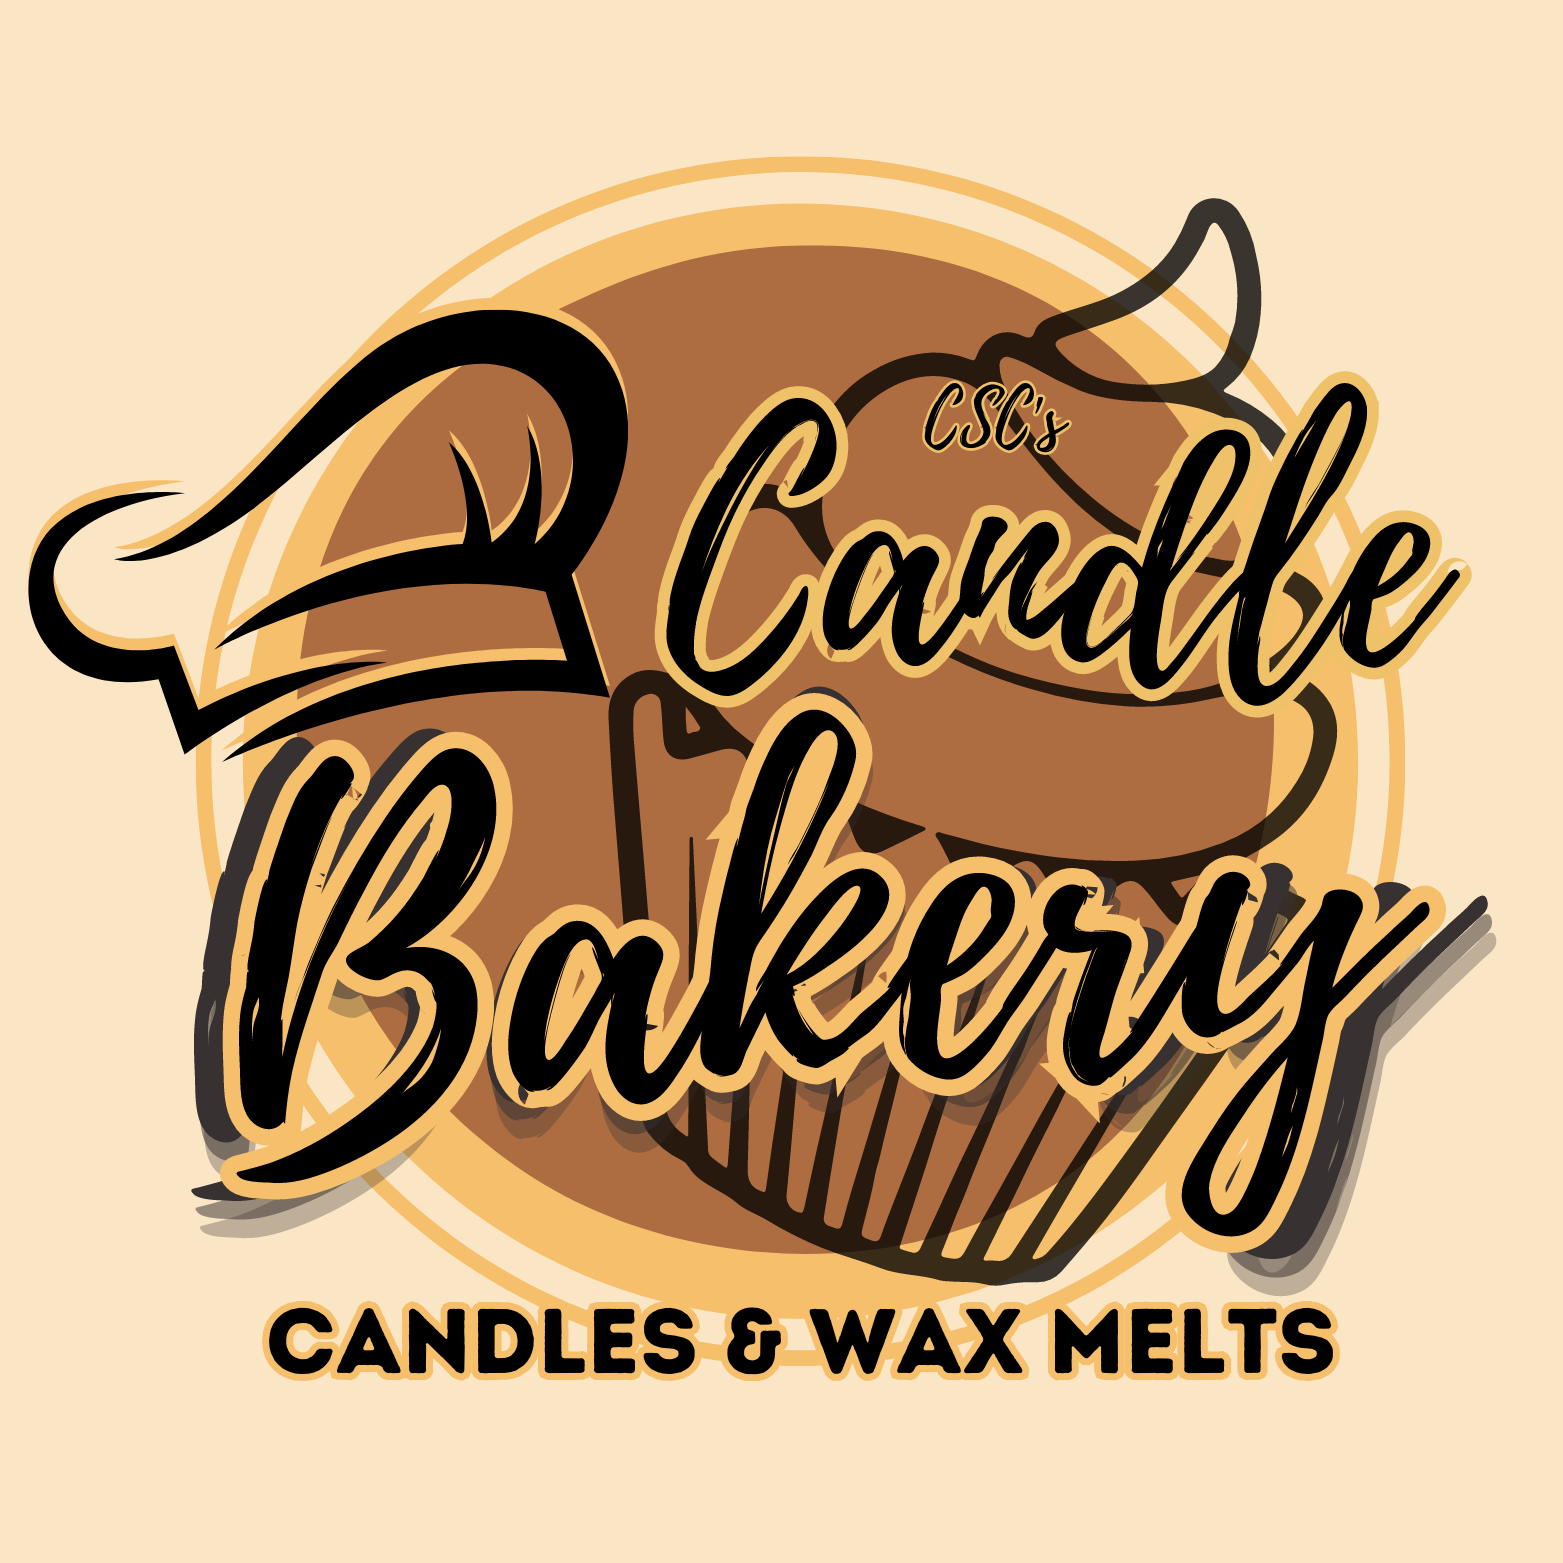 CSC's Candle Bakery